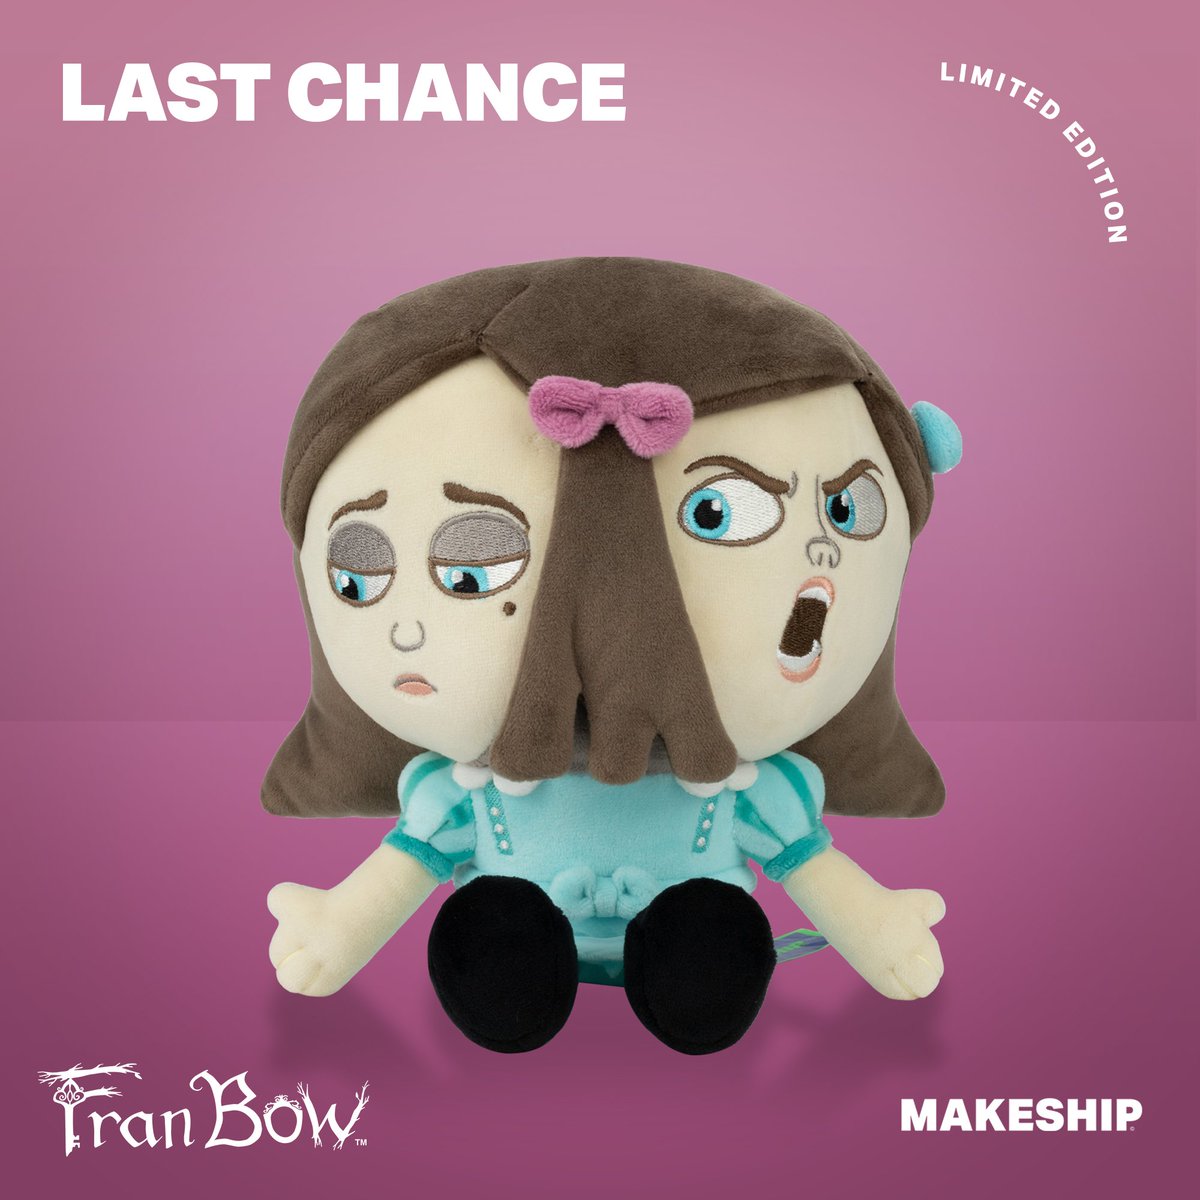 Last chance to get the Buhalmet twins plushie! 💎🎀
👉 makeship.com/products/clara…
Only available during this campaign! 

#killmondaygames #indiegame #horrorgame #makeship #franbow #gamemerch #plushie #claraandmia #buhalmettwins #buhalmettwinsplushie #franbowmerch